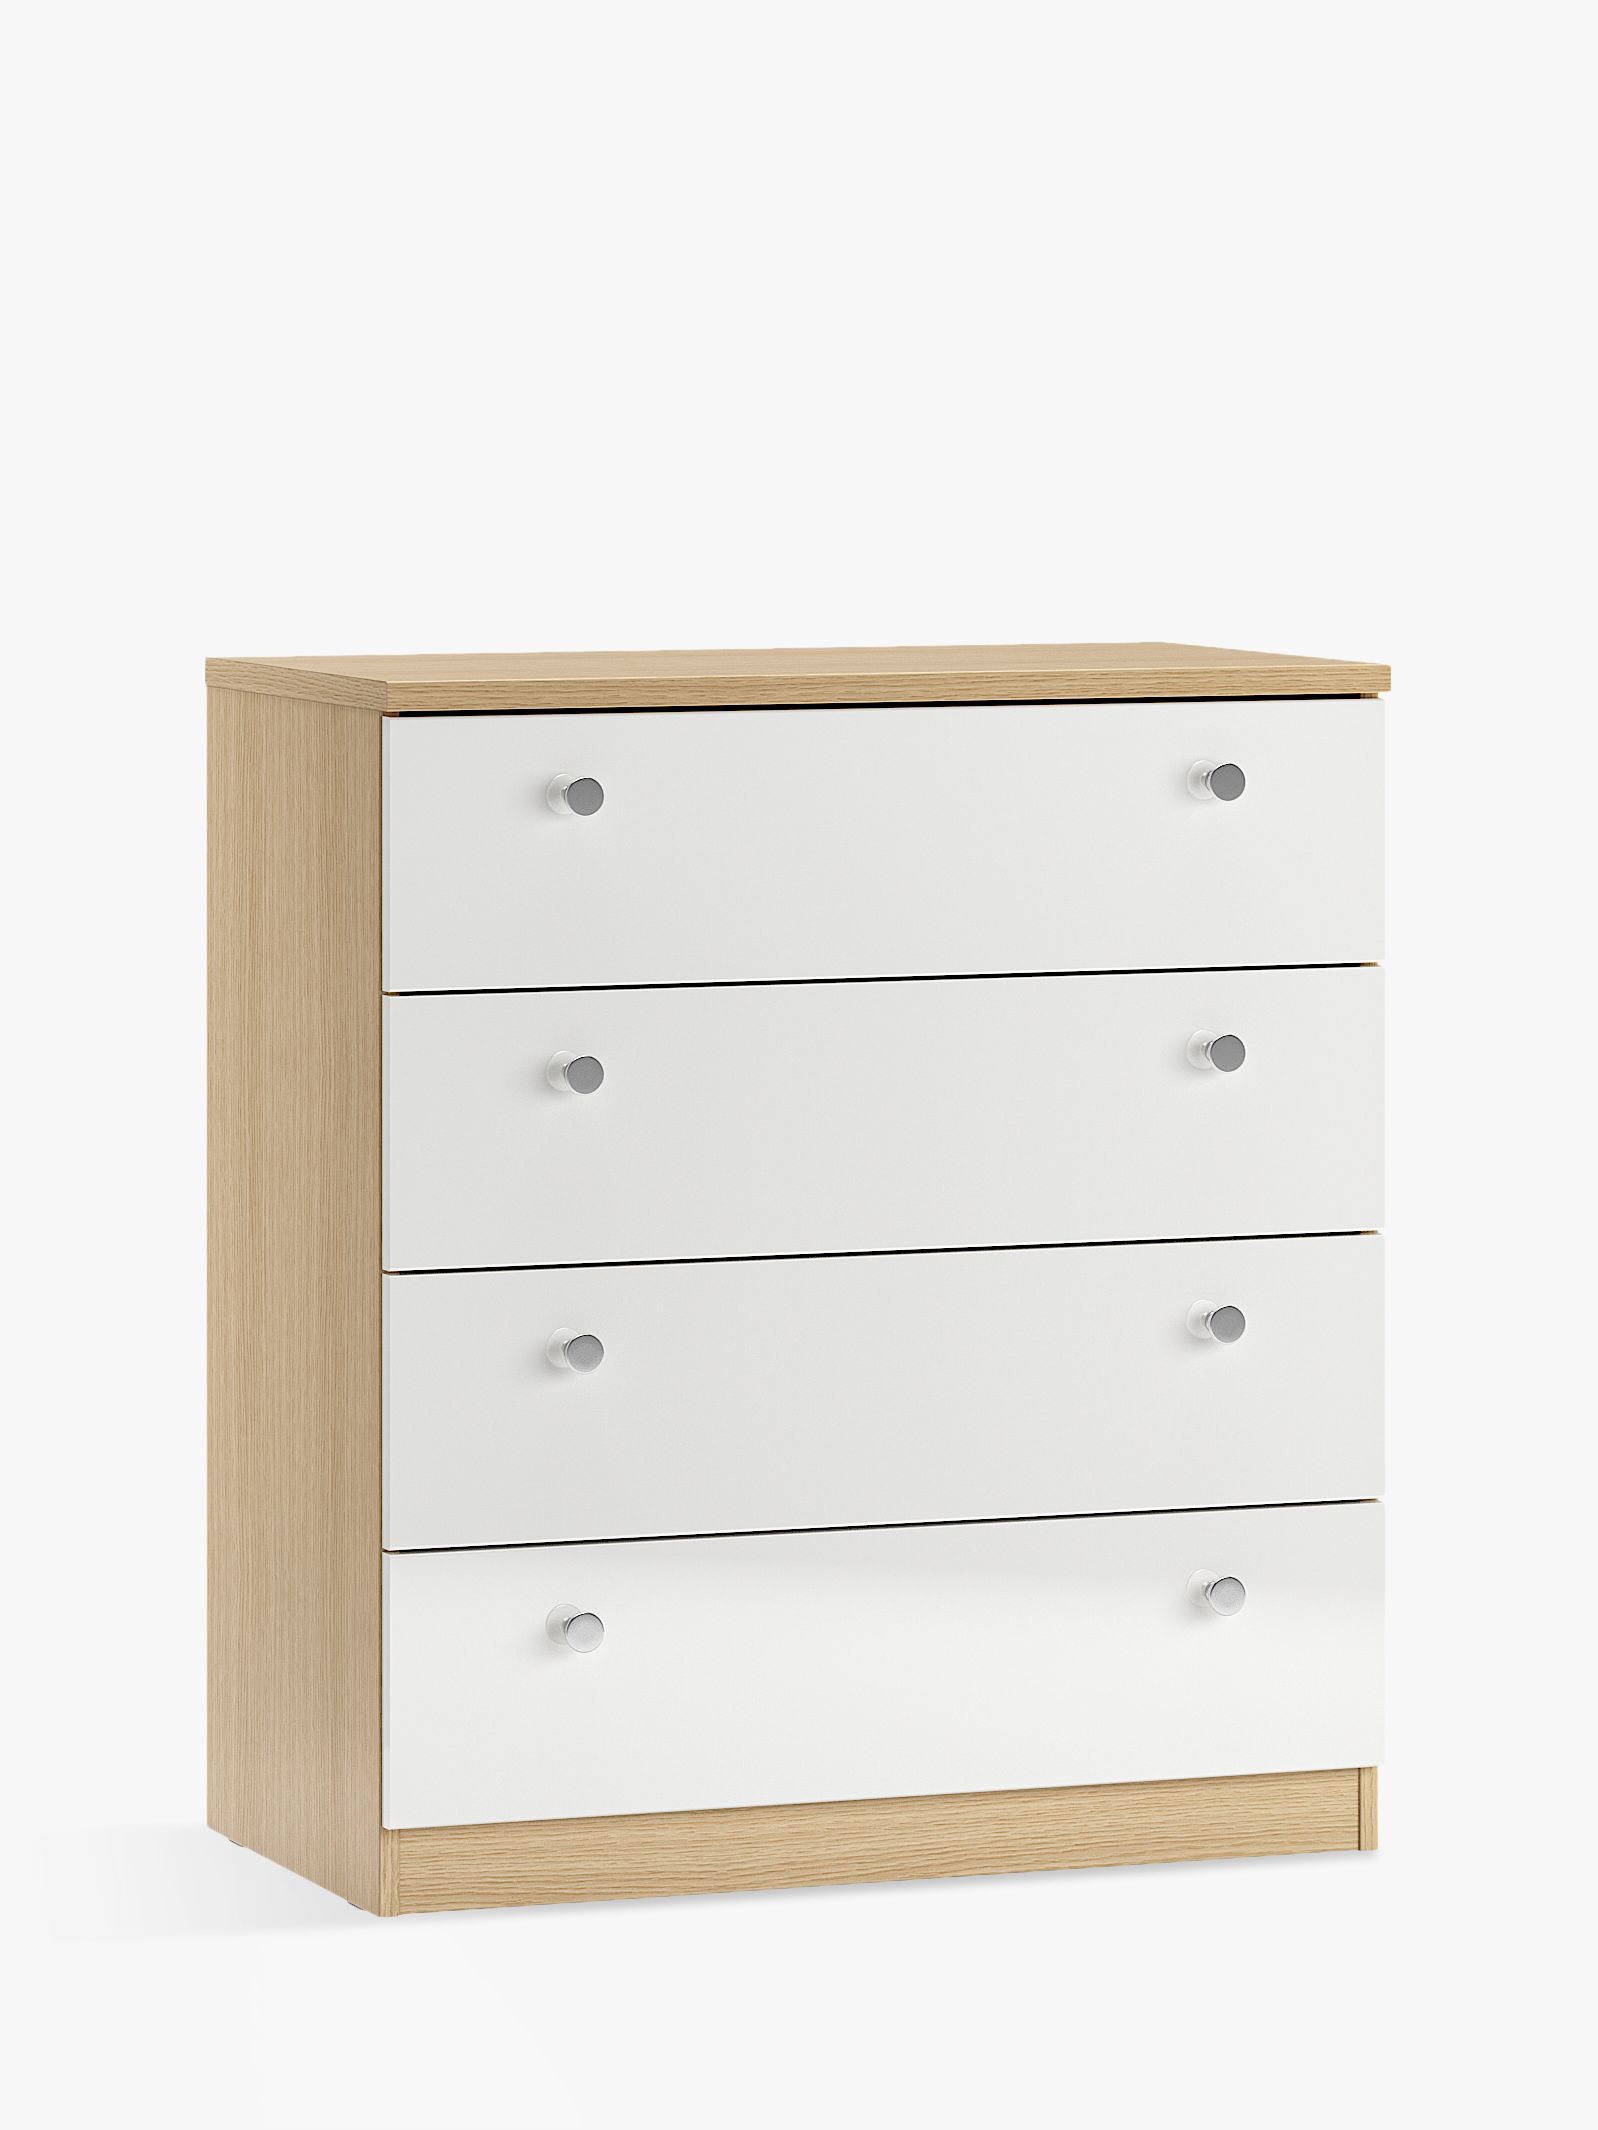 Photo of John lewis anyday mix it wide 4 drawer chest chrome knob handles oak/gloss white